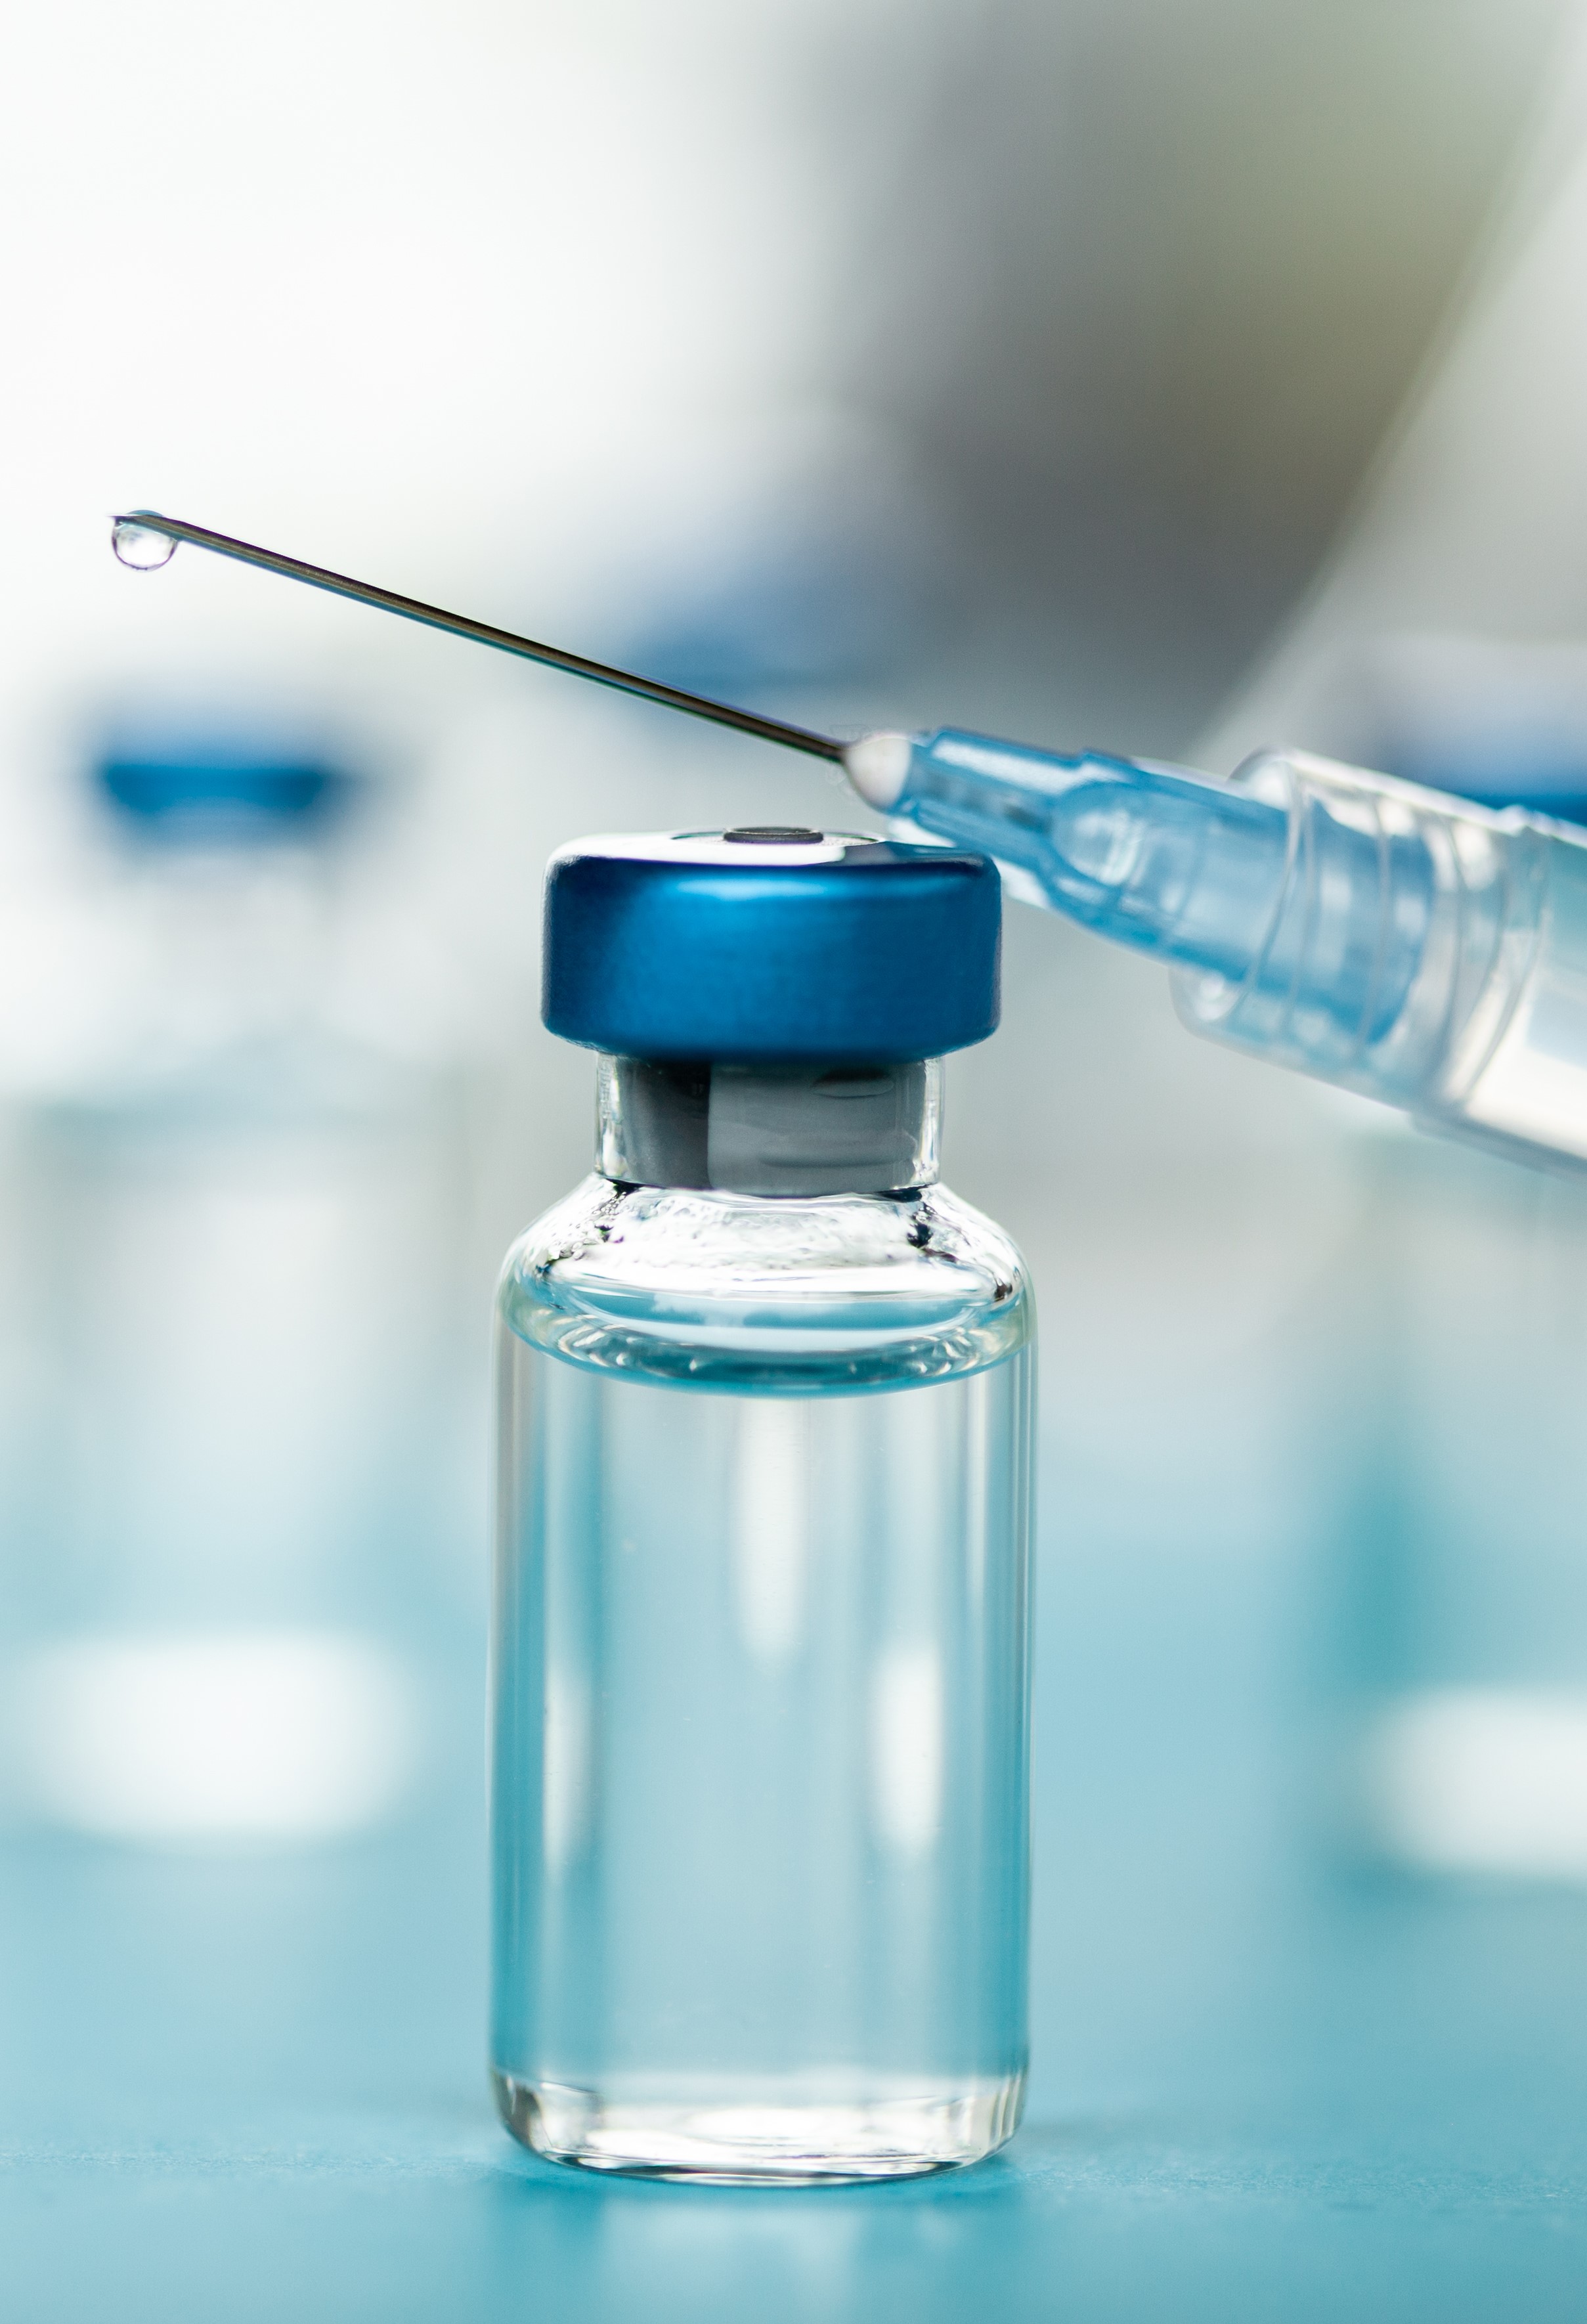 Small syringe and vial in blue tones on lab bench